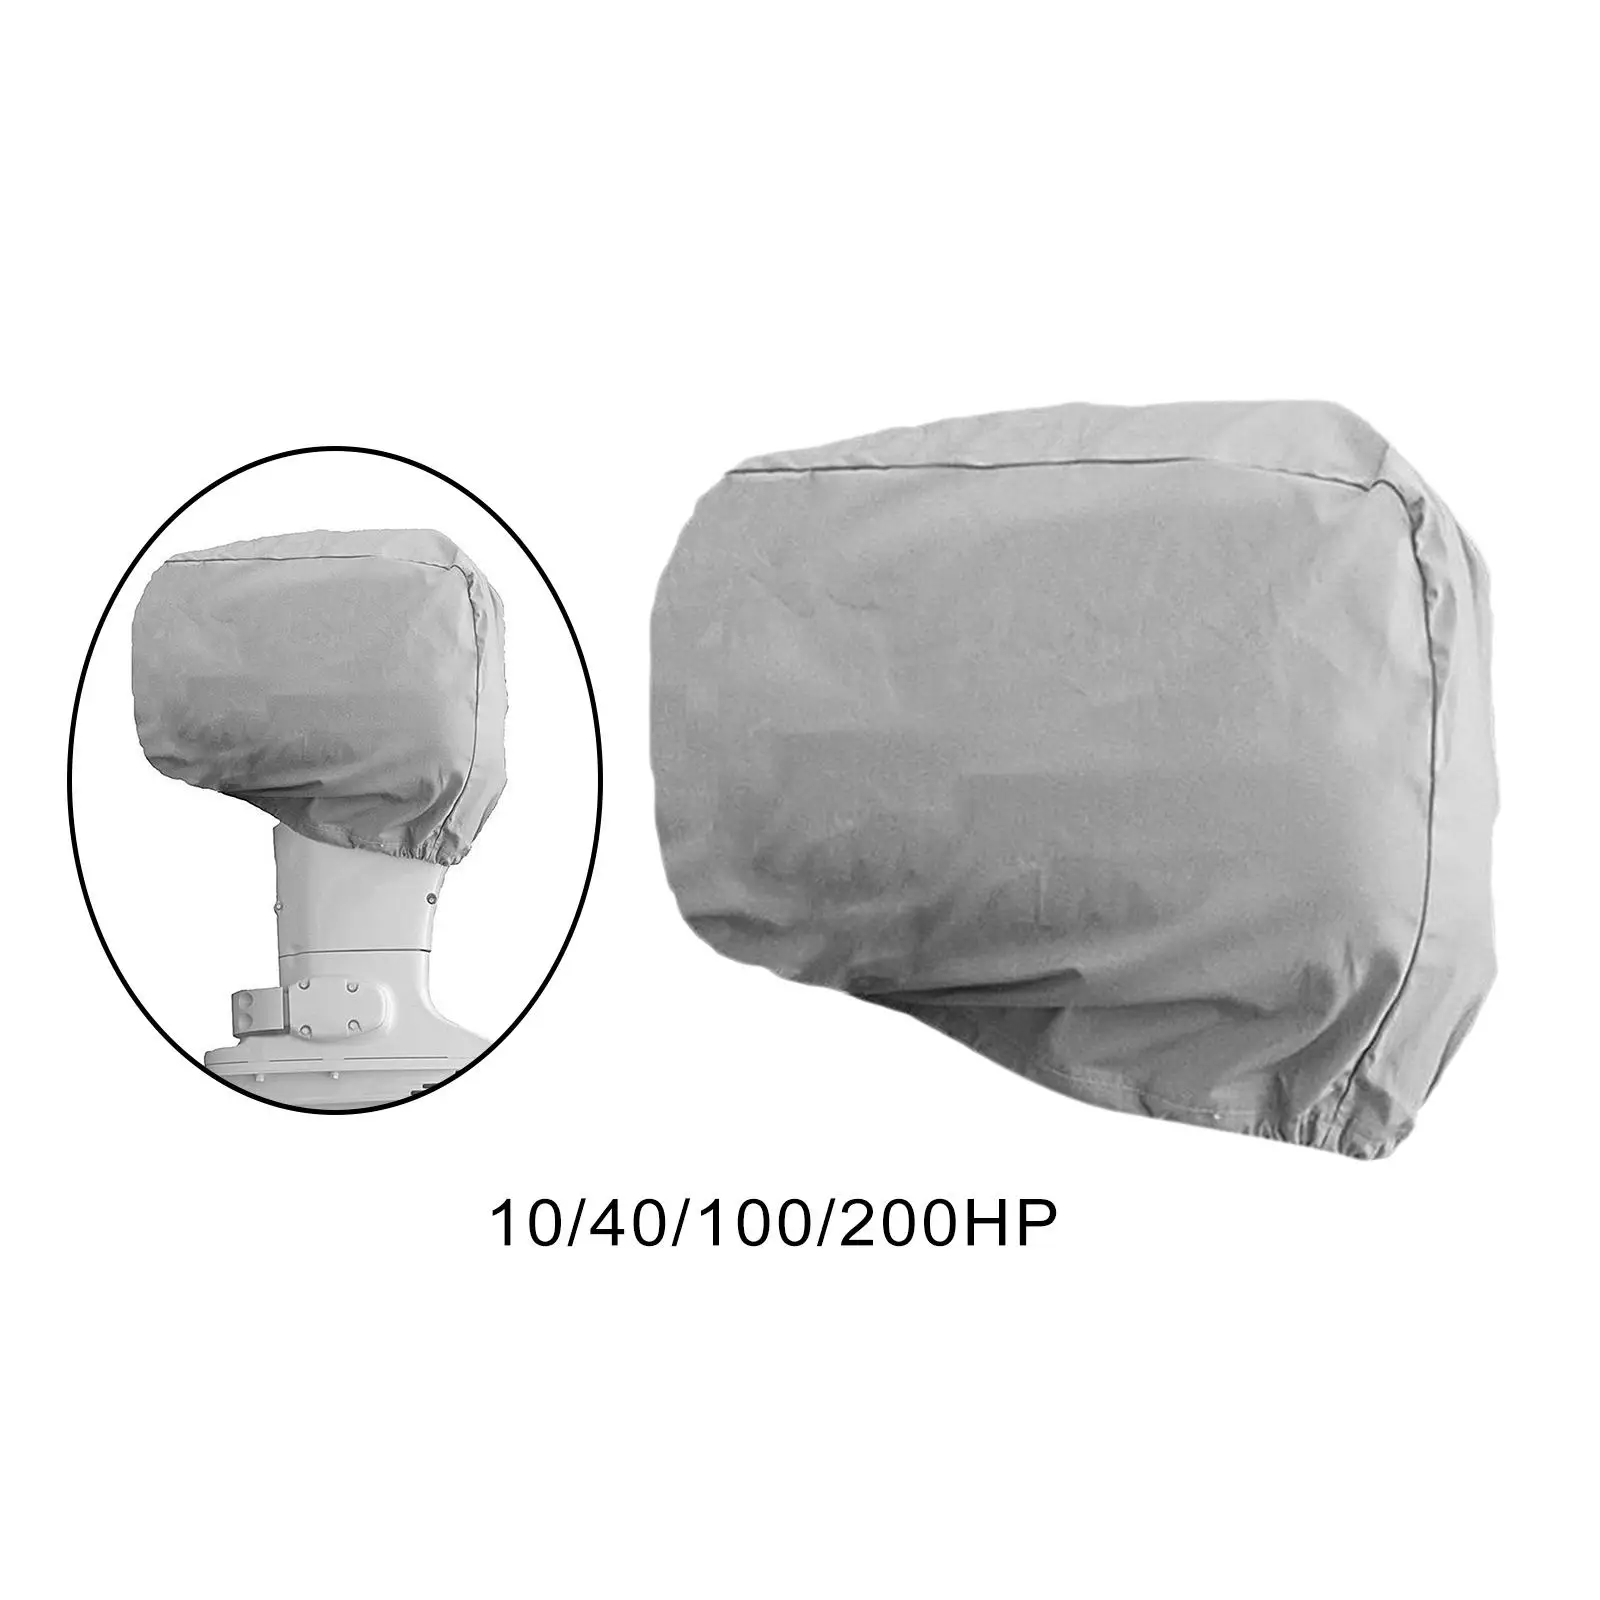 Boat Hood Covers Portable Dust Proof Heavy Duty Waterproof Engine Protector Oxford Outboard Motor Cover for Boats Sea Navigation